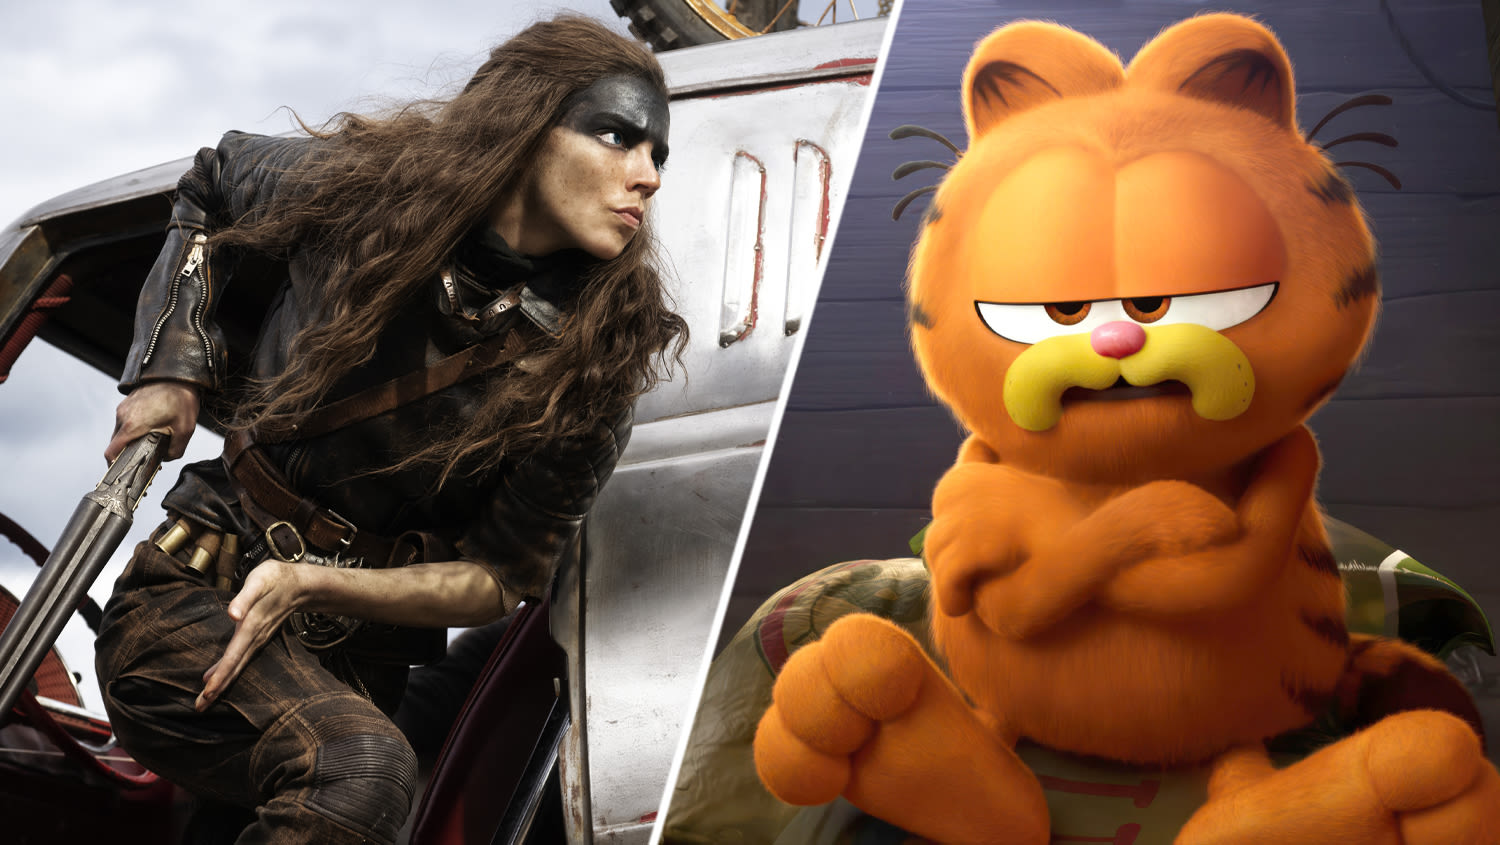 ...No. 1 Memorial Day Weekend Opening In Decades; ‘The Garfield Movie’ Clawing At $30M-$32M – Friday PM Update